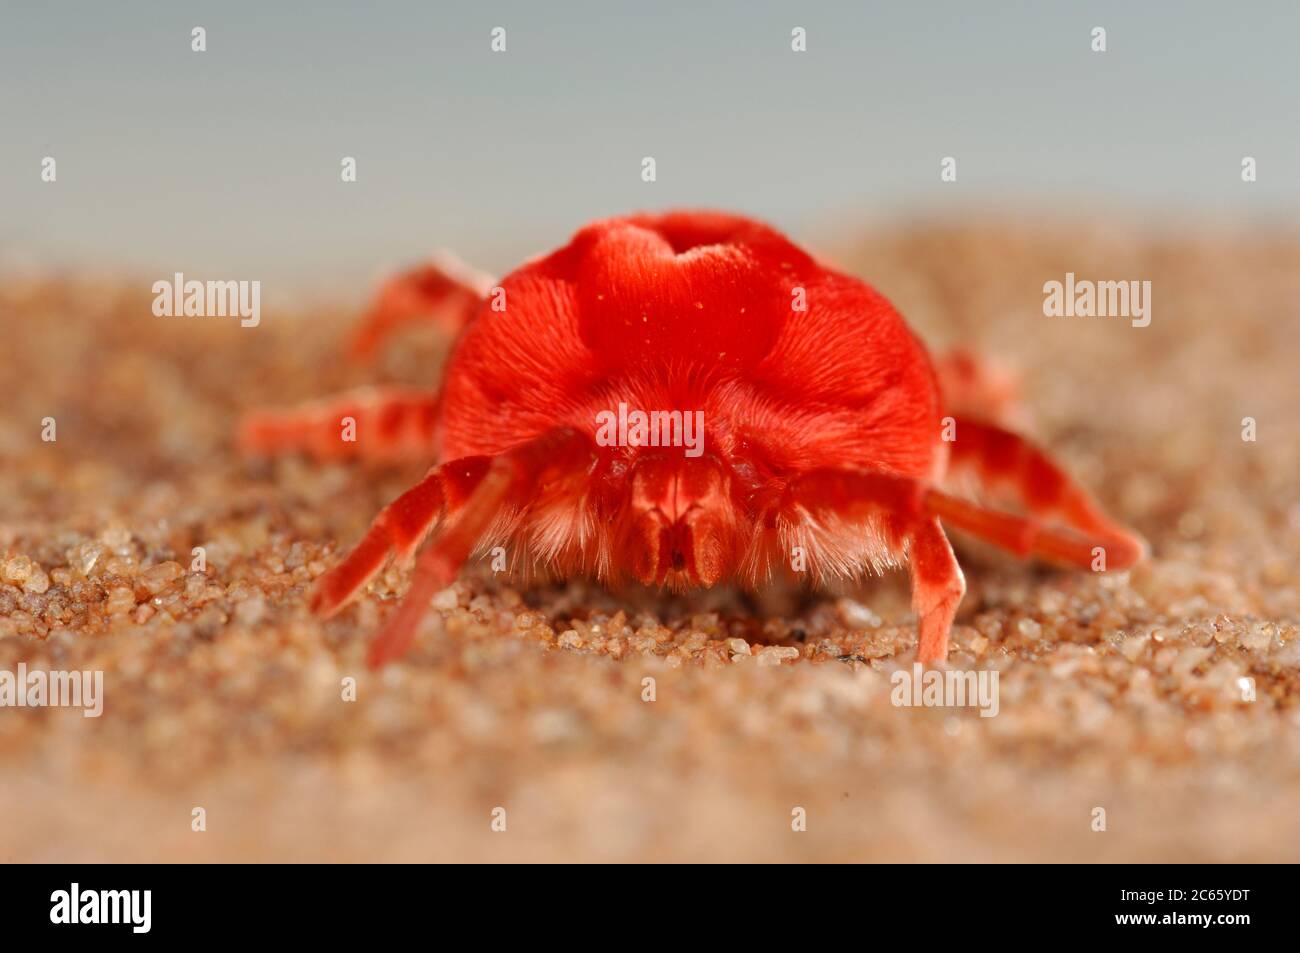 Giant Red Mite Stock Photo